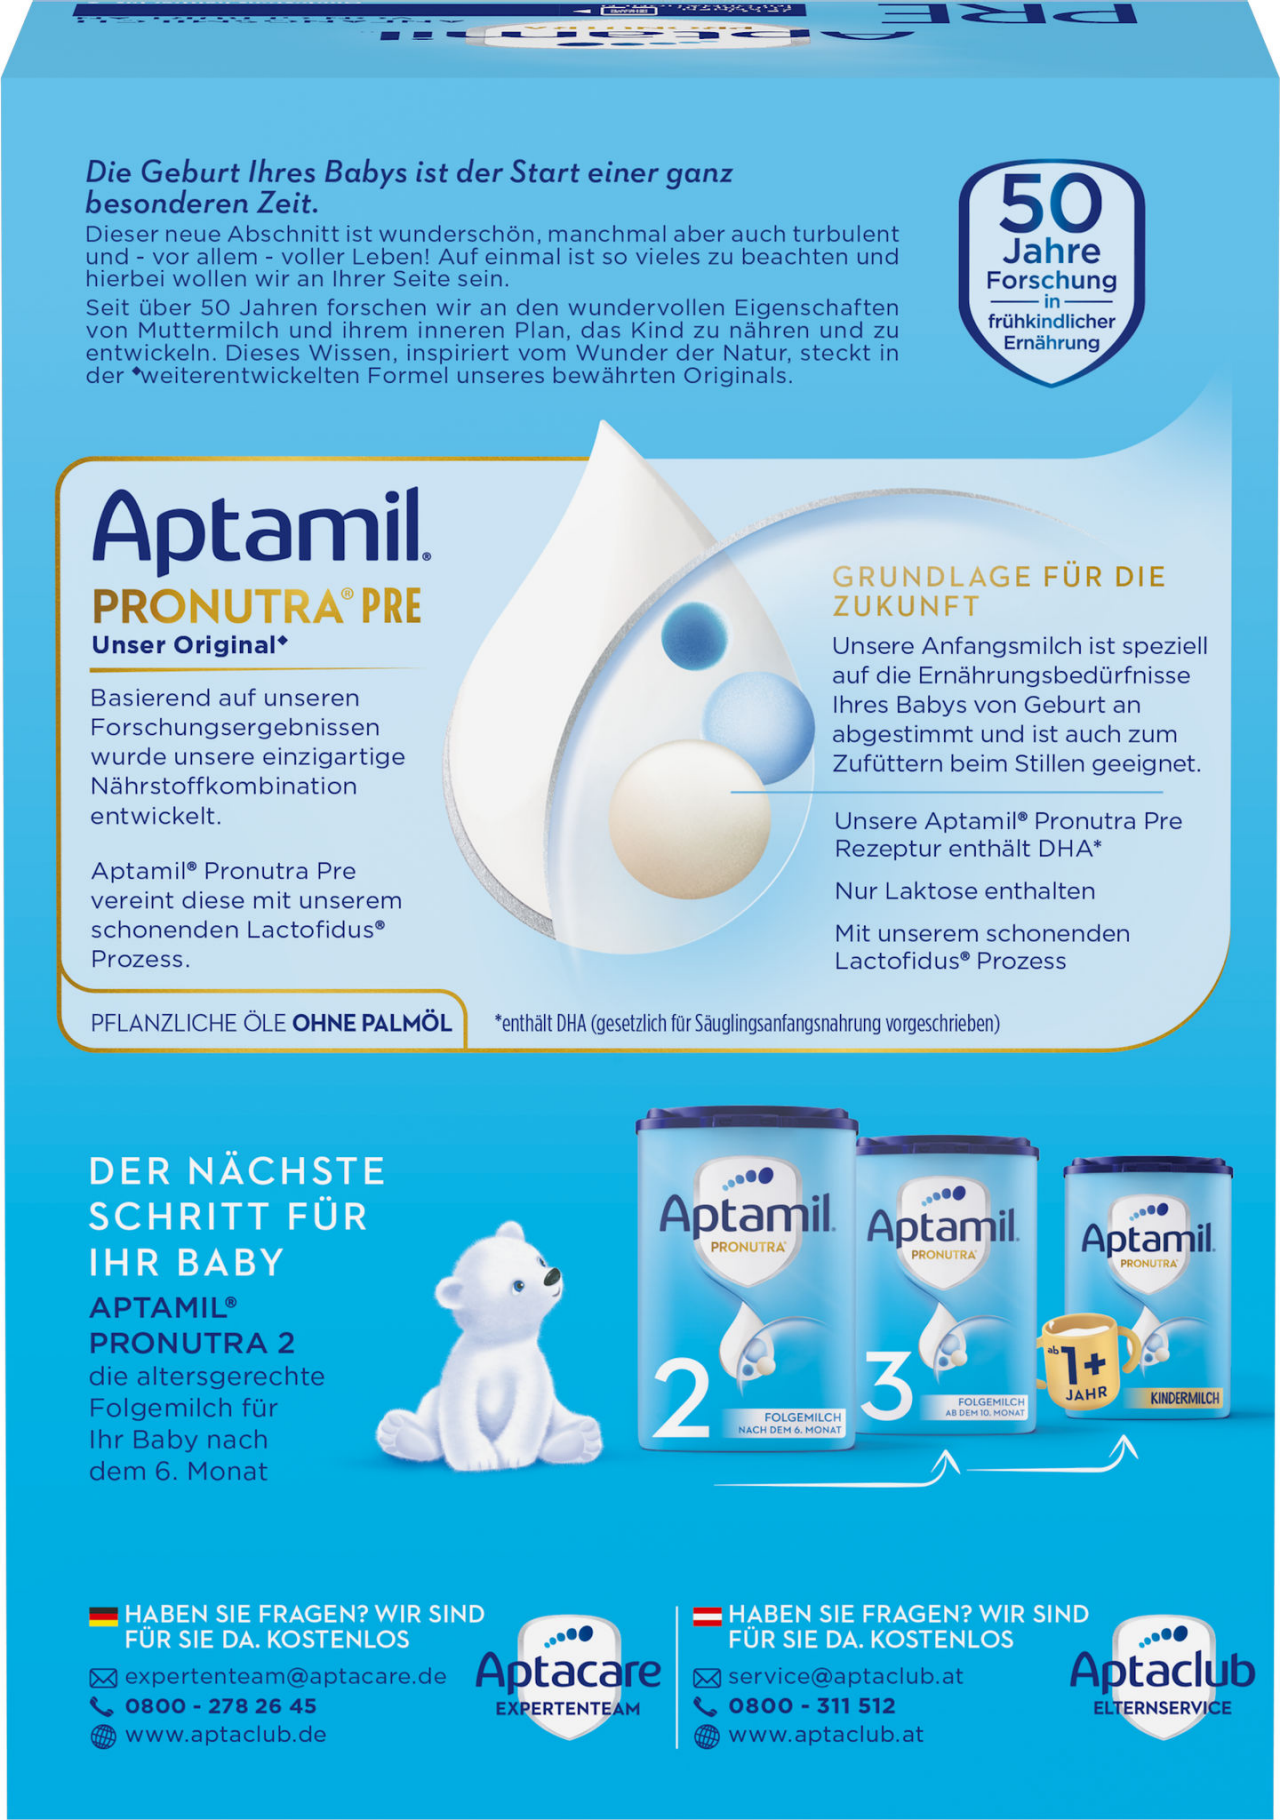 STARCH Advance 1 with Pronutra Milk for Infants Pack 3x1200gr